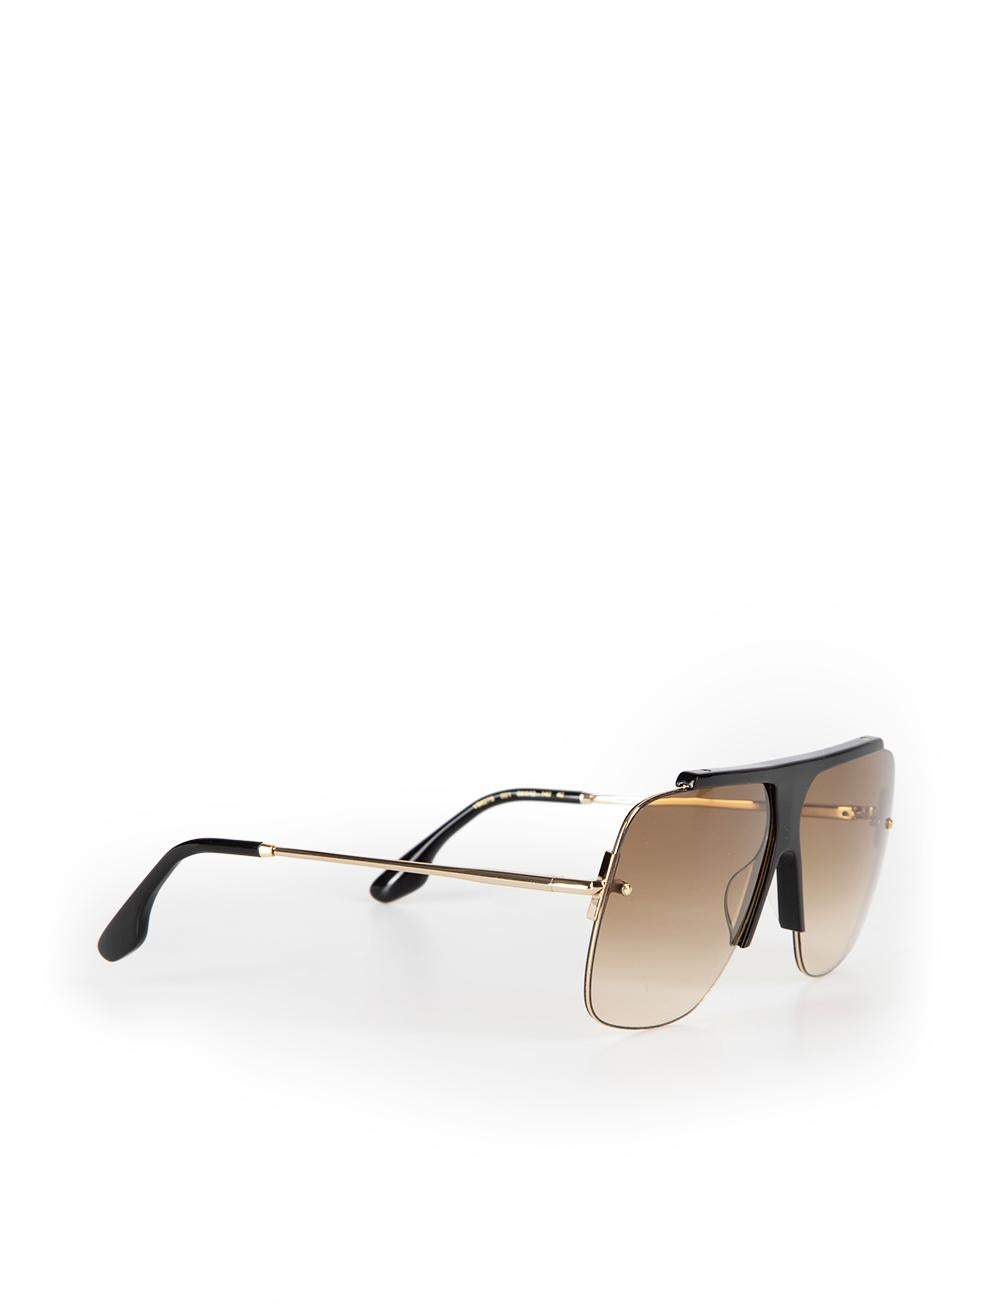 Victoria Beckham Brown Gradient Navigator Sunglasses In New Condition For Sale In London, GB